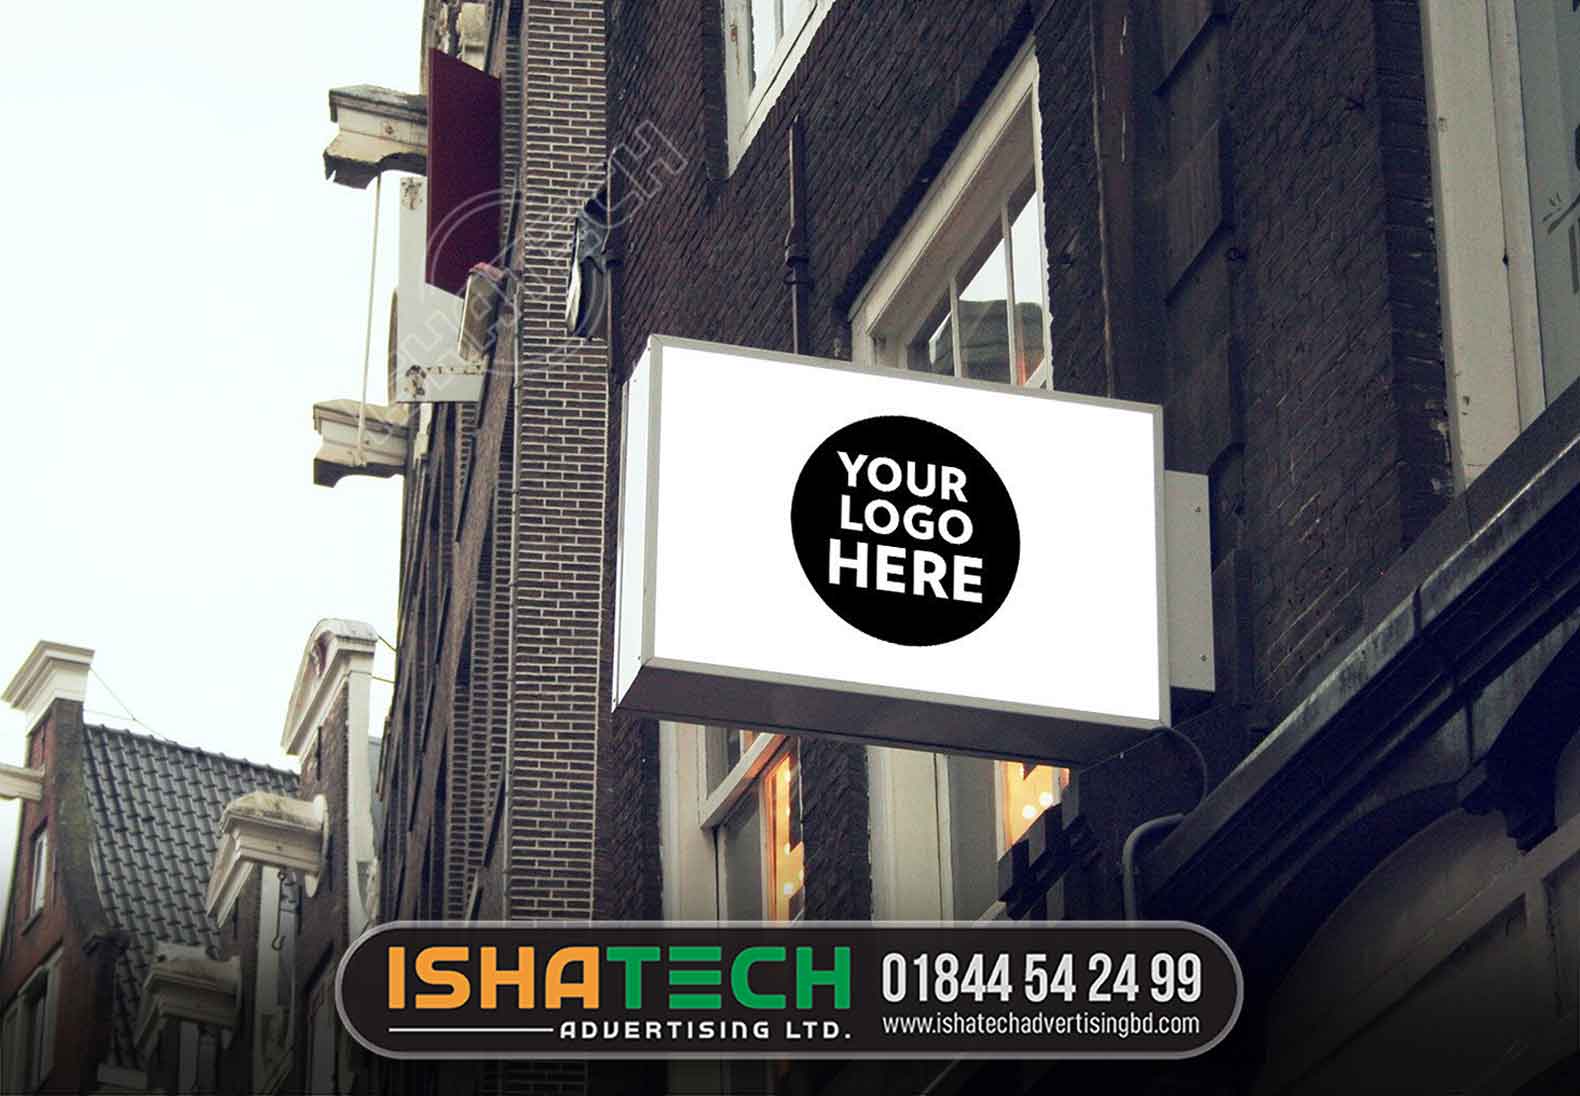 LOGO LED SIGND FOR SHOP, RESTAURANT SIGNS IN DHAKA, BANGLADESH. THE SAMPLE CREATE BY ISHATECH ADVERTISING LTD